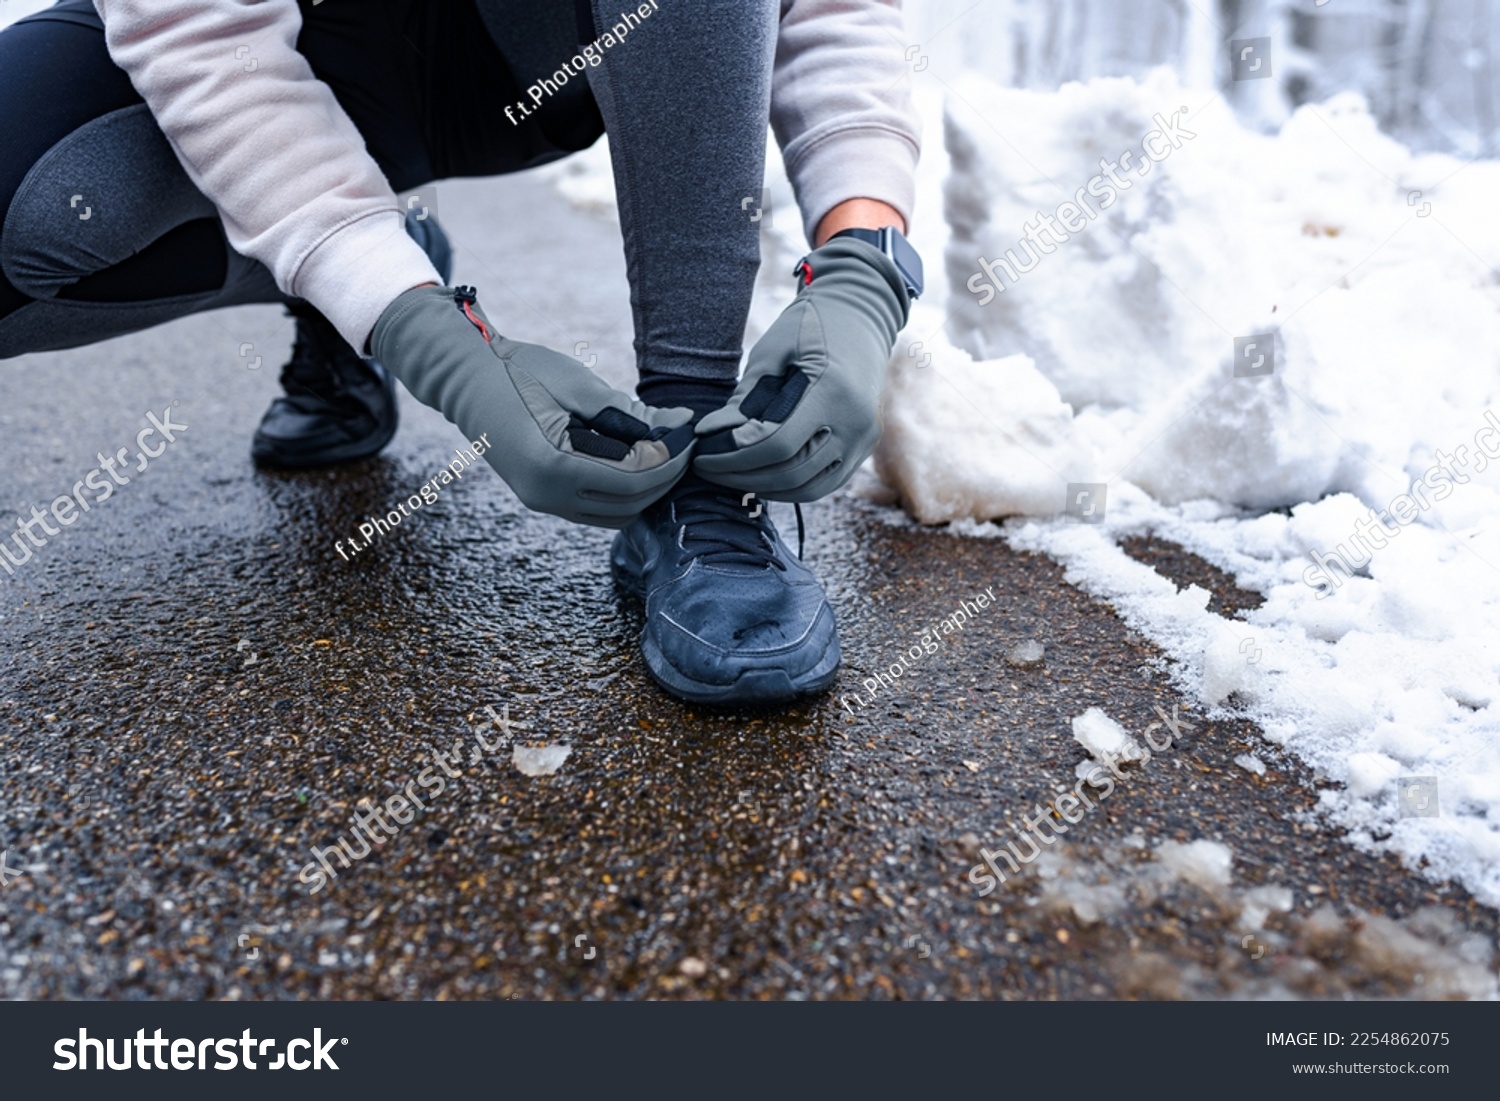 Closeup image of a person tying shoelaces on wet road, snow on the ground and sports equipment in focus. #2254862075